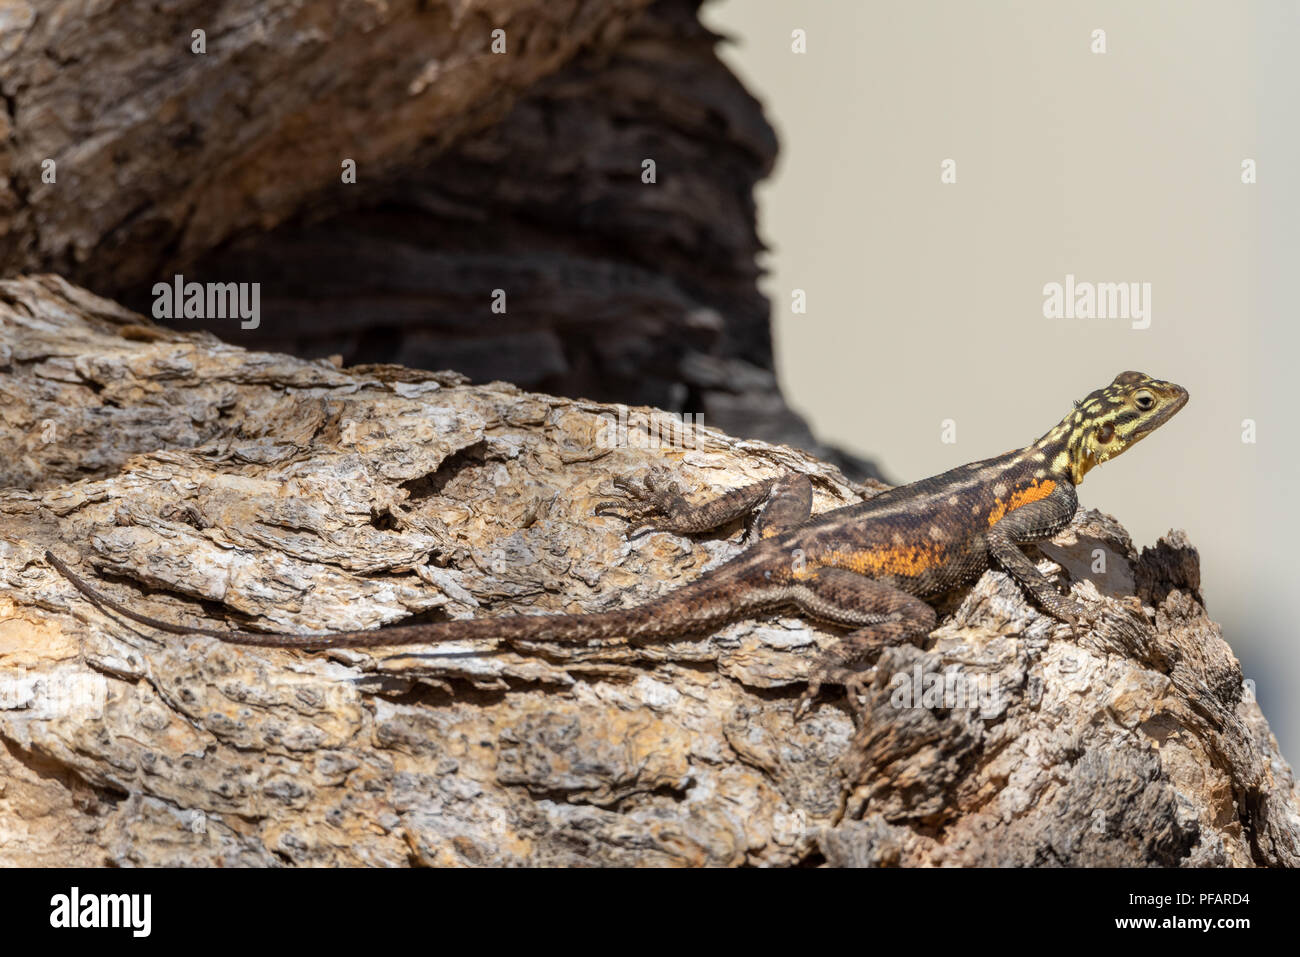 Very colorful namibian rock agama, lizard reptile, yellow head and orange body sitting on a rock, Namibia Stock Photo